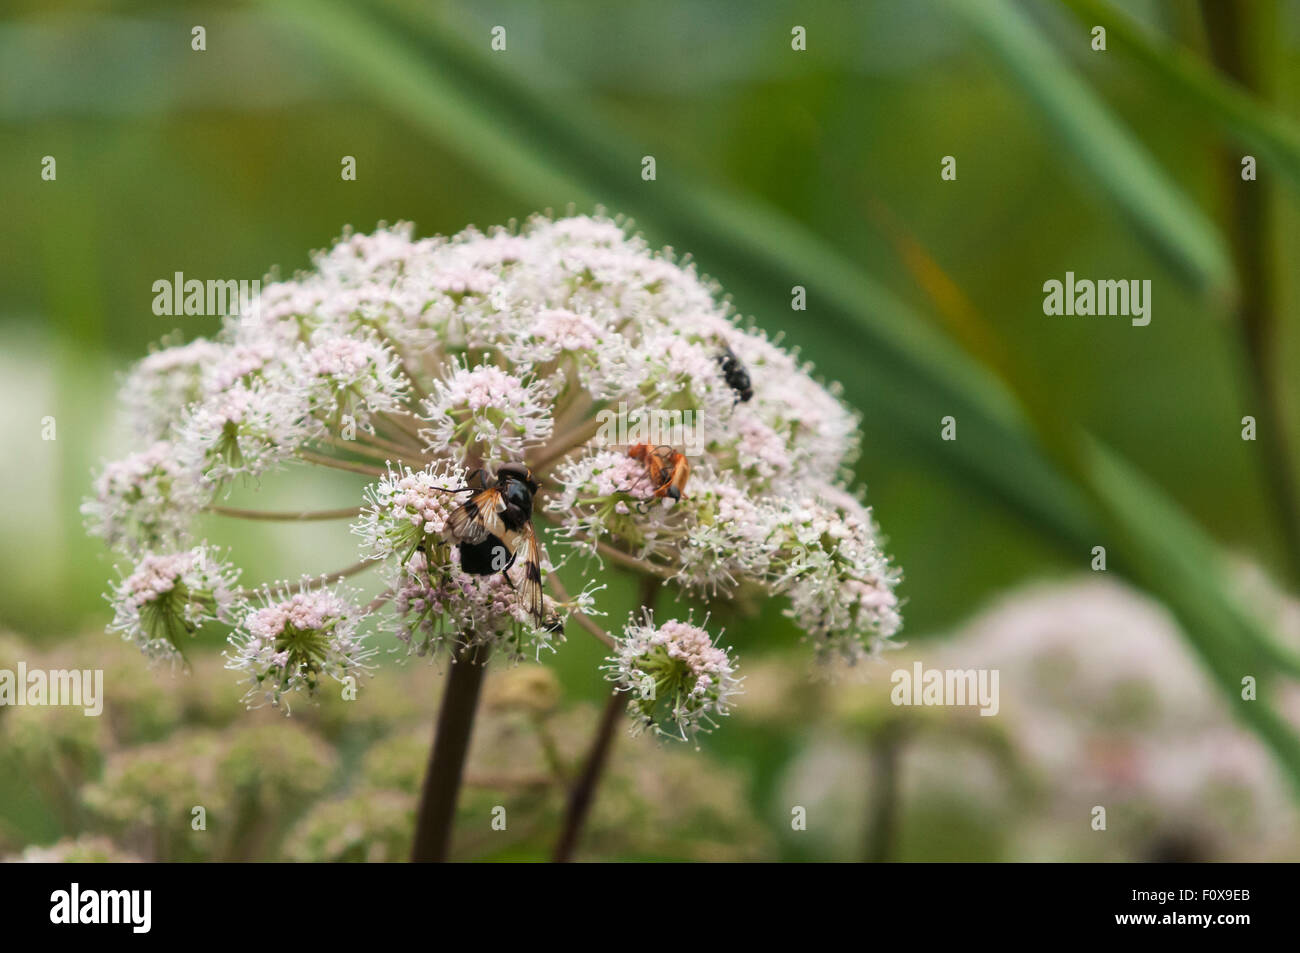 A White banded Drone Fly, Volucella pellucens, feeding on one of the many cow parsley plants. Stock Photo